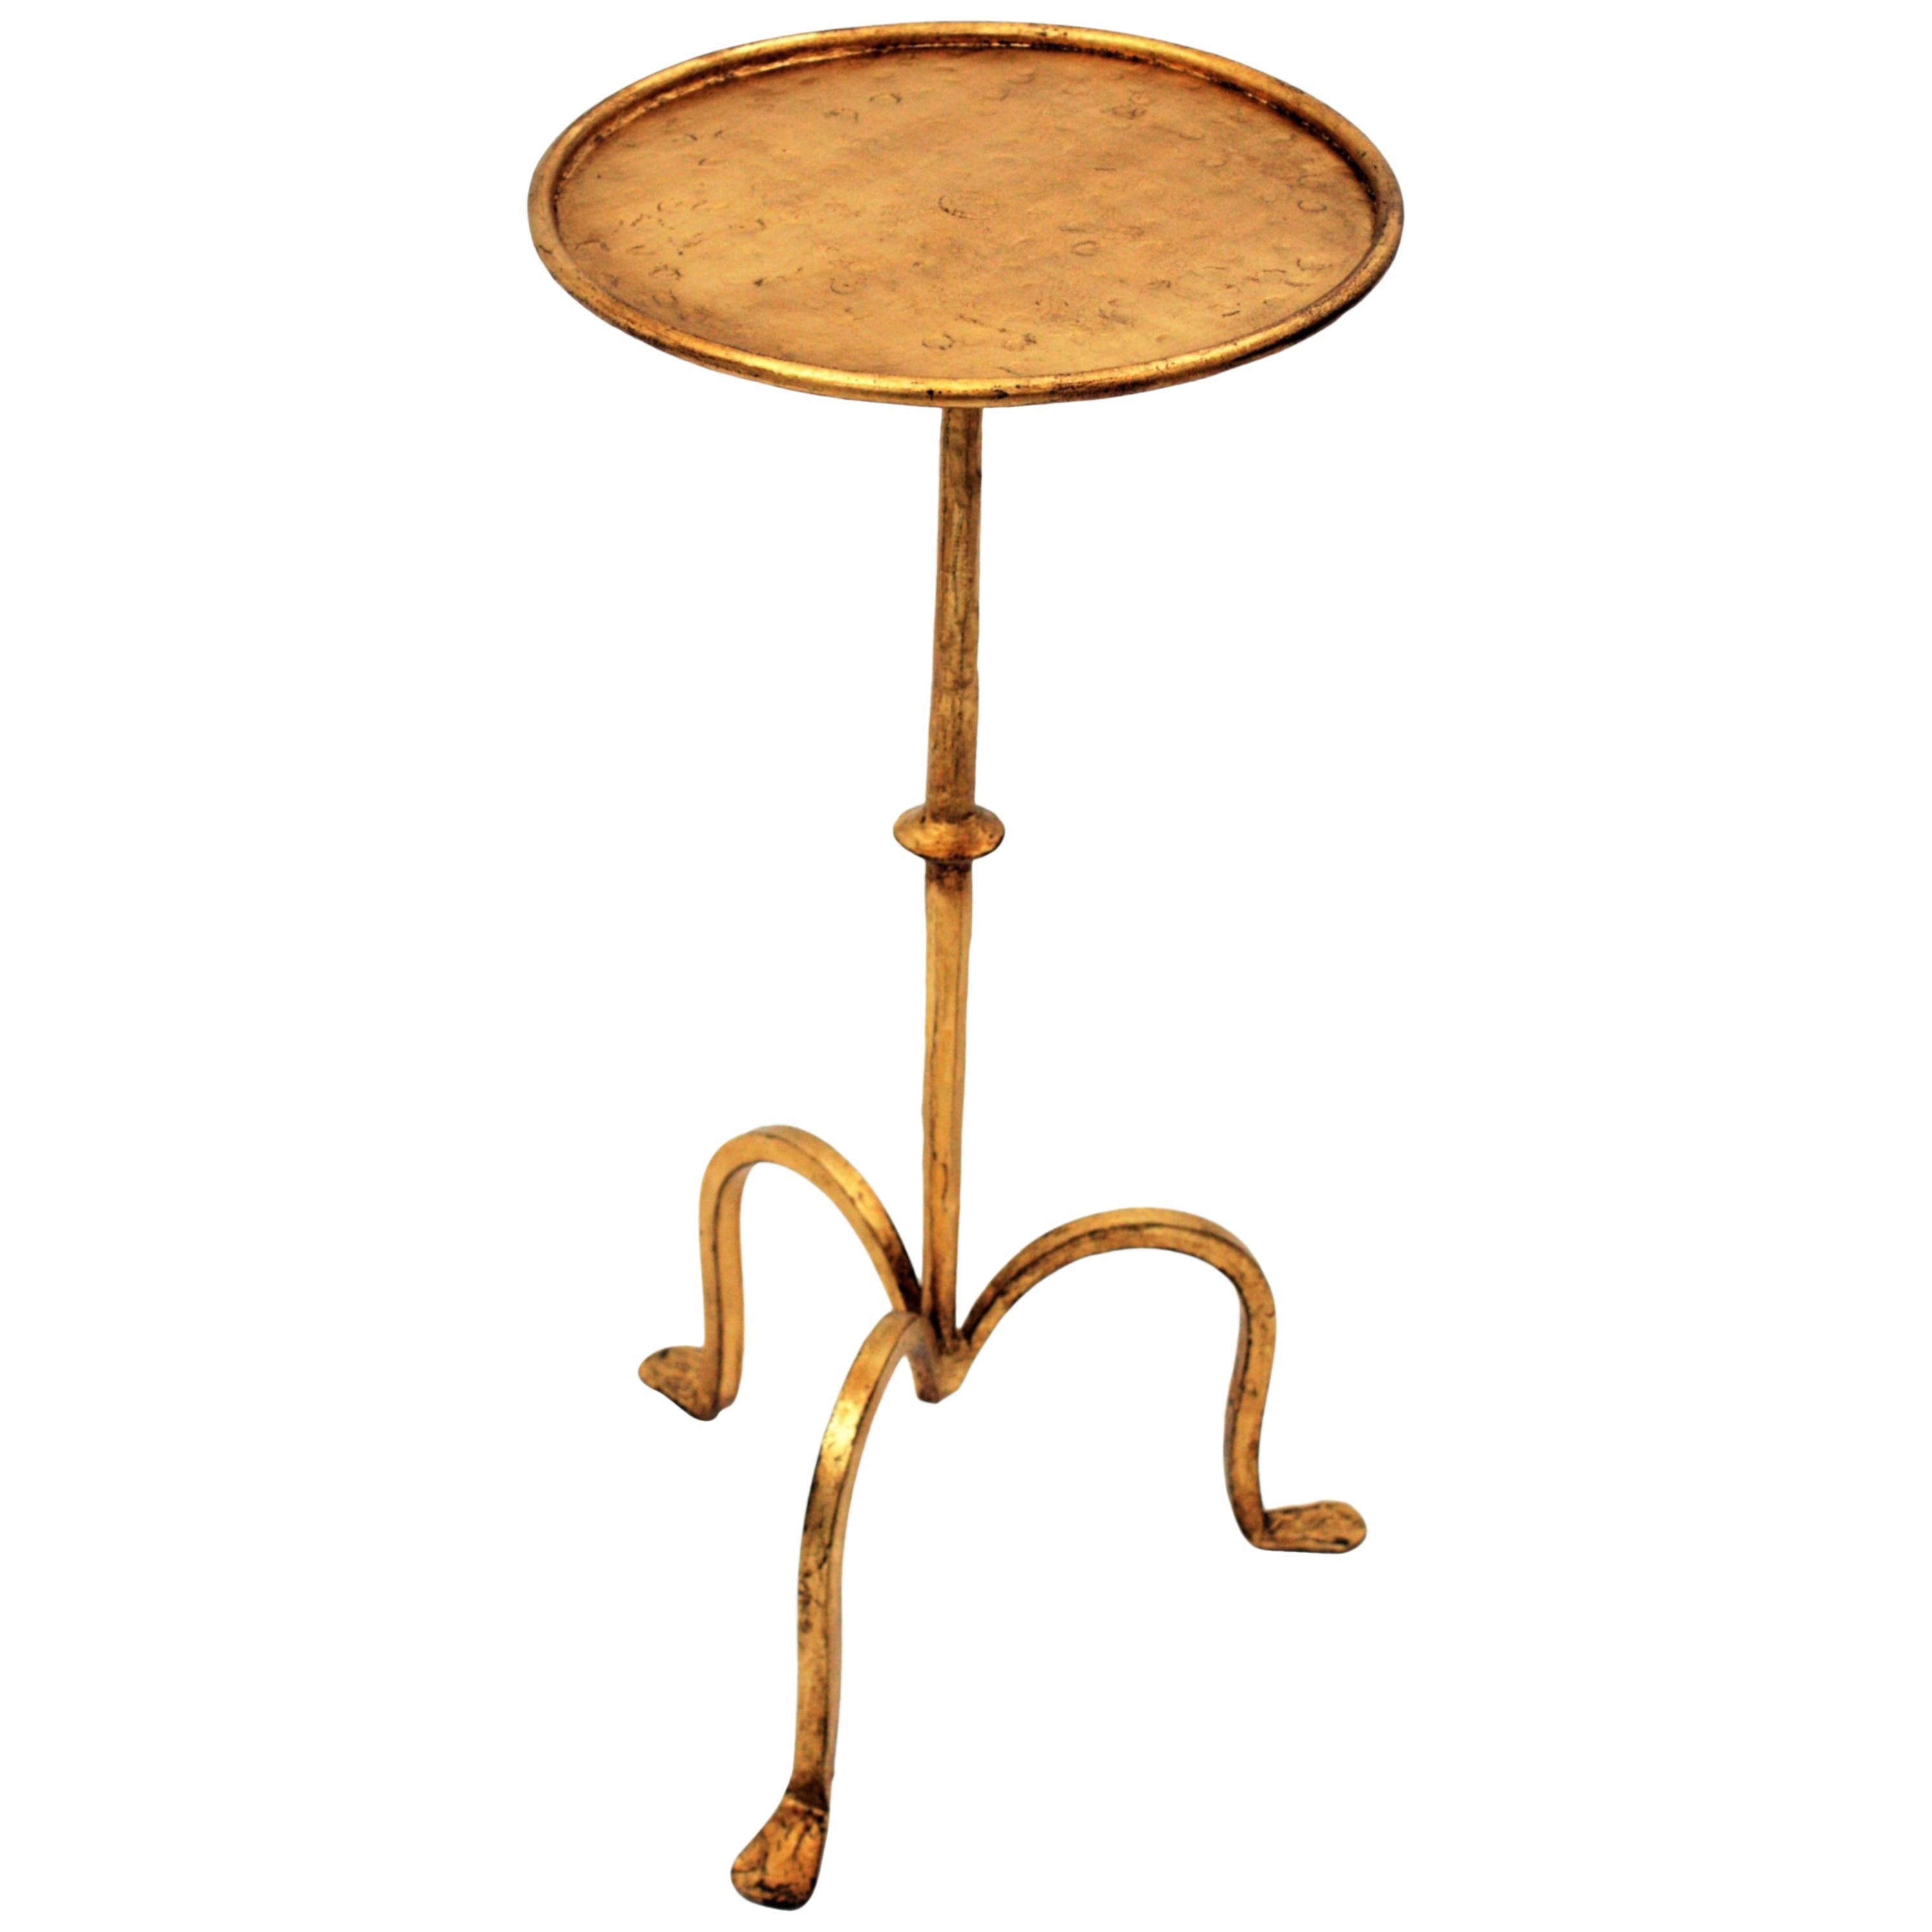 Spanish 1950s Small Hand-Hammered Gilt Iron End Table / Gueridon / Drinks Table